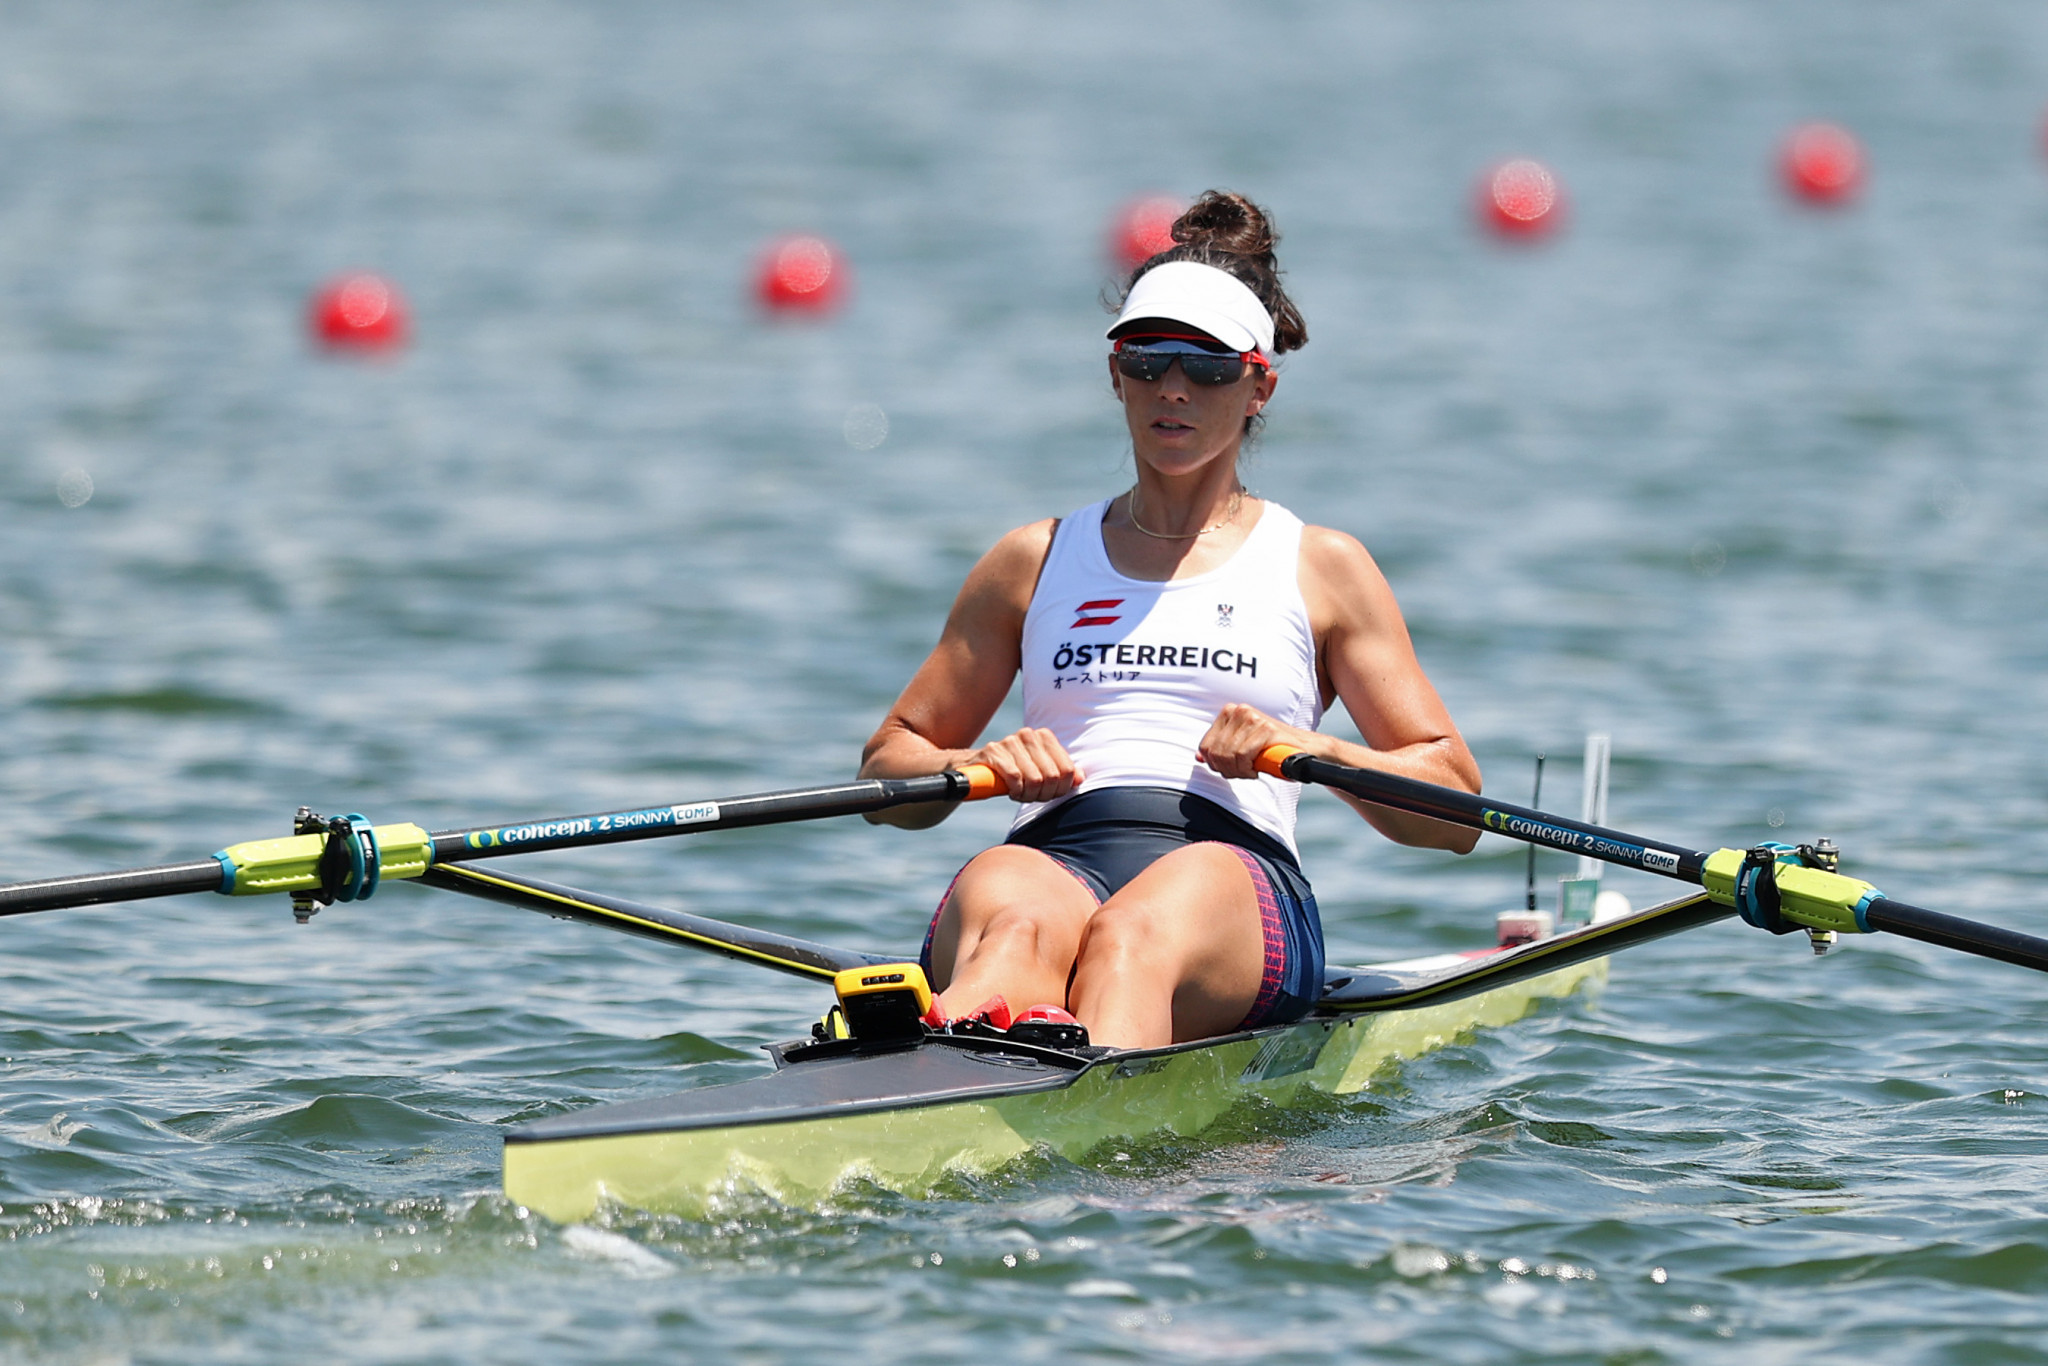 Austria's Tokyo 2020 bronze medallist Magdalena Lobnig is among the likely contenders in the women's singles sculls race in Belgrade ©Getty Images